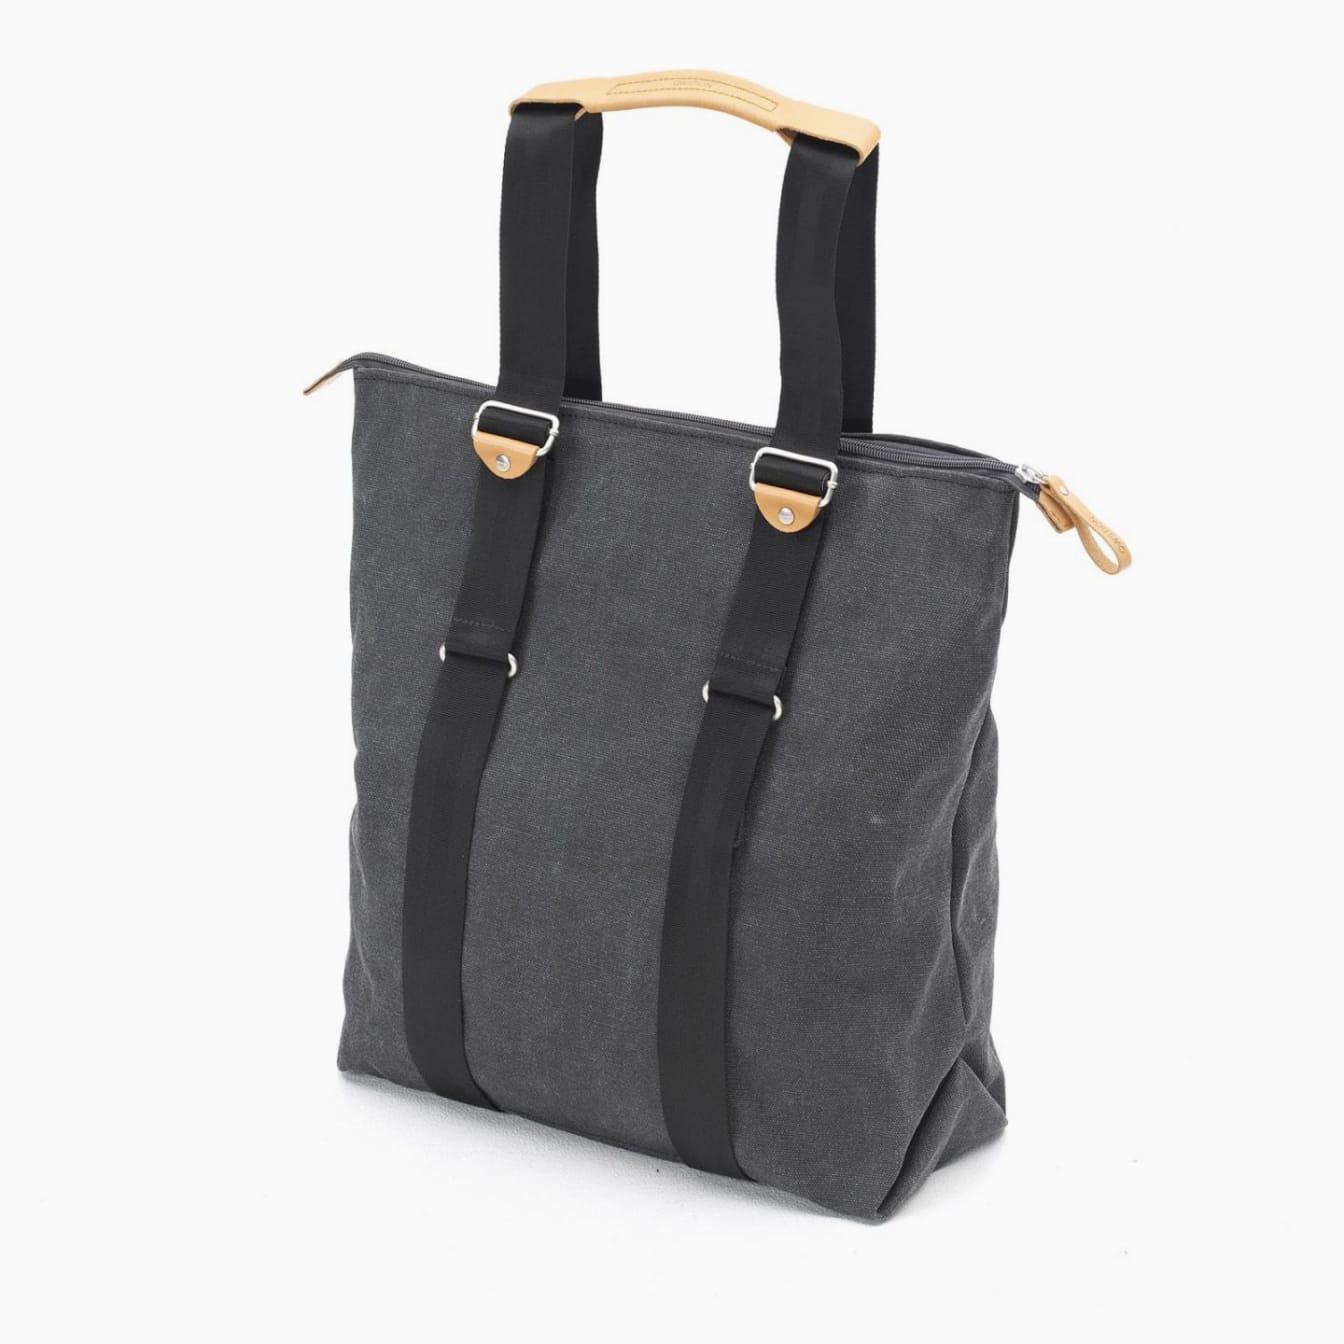 Angled front view with bag zipped and handles upright.